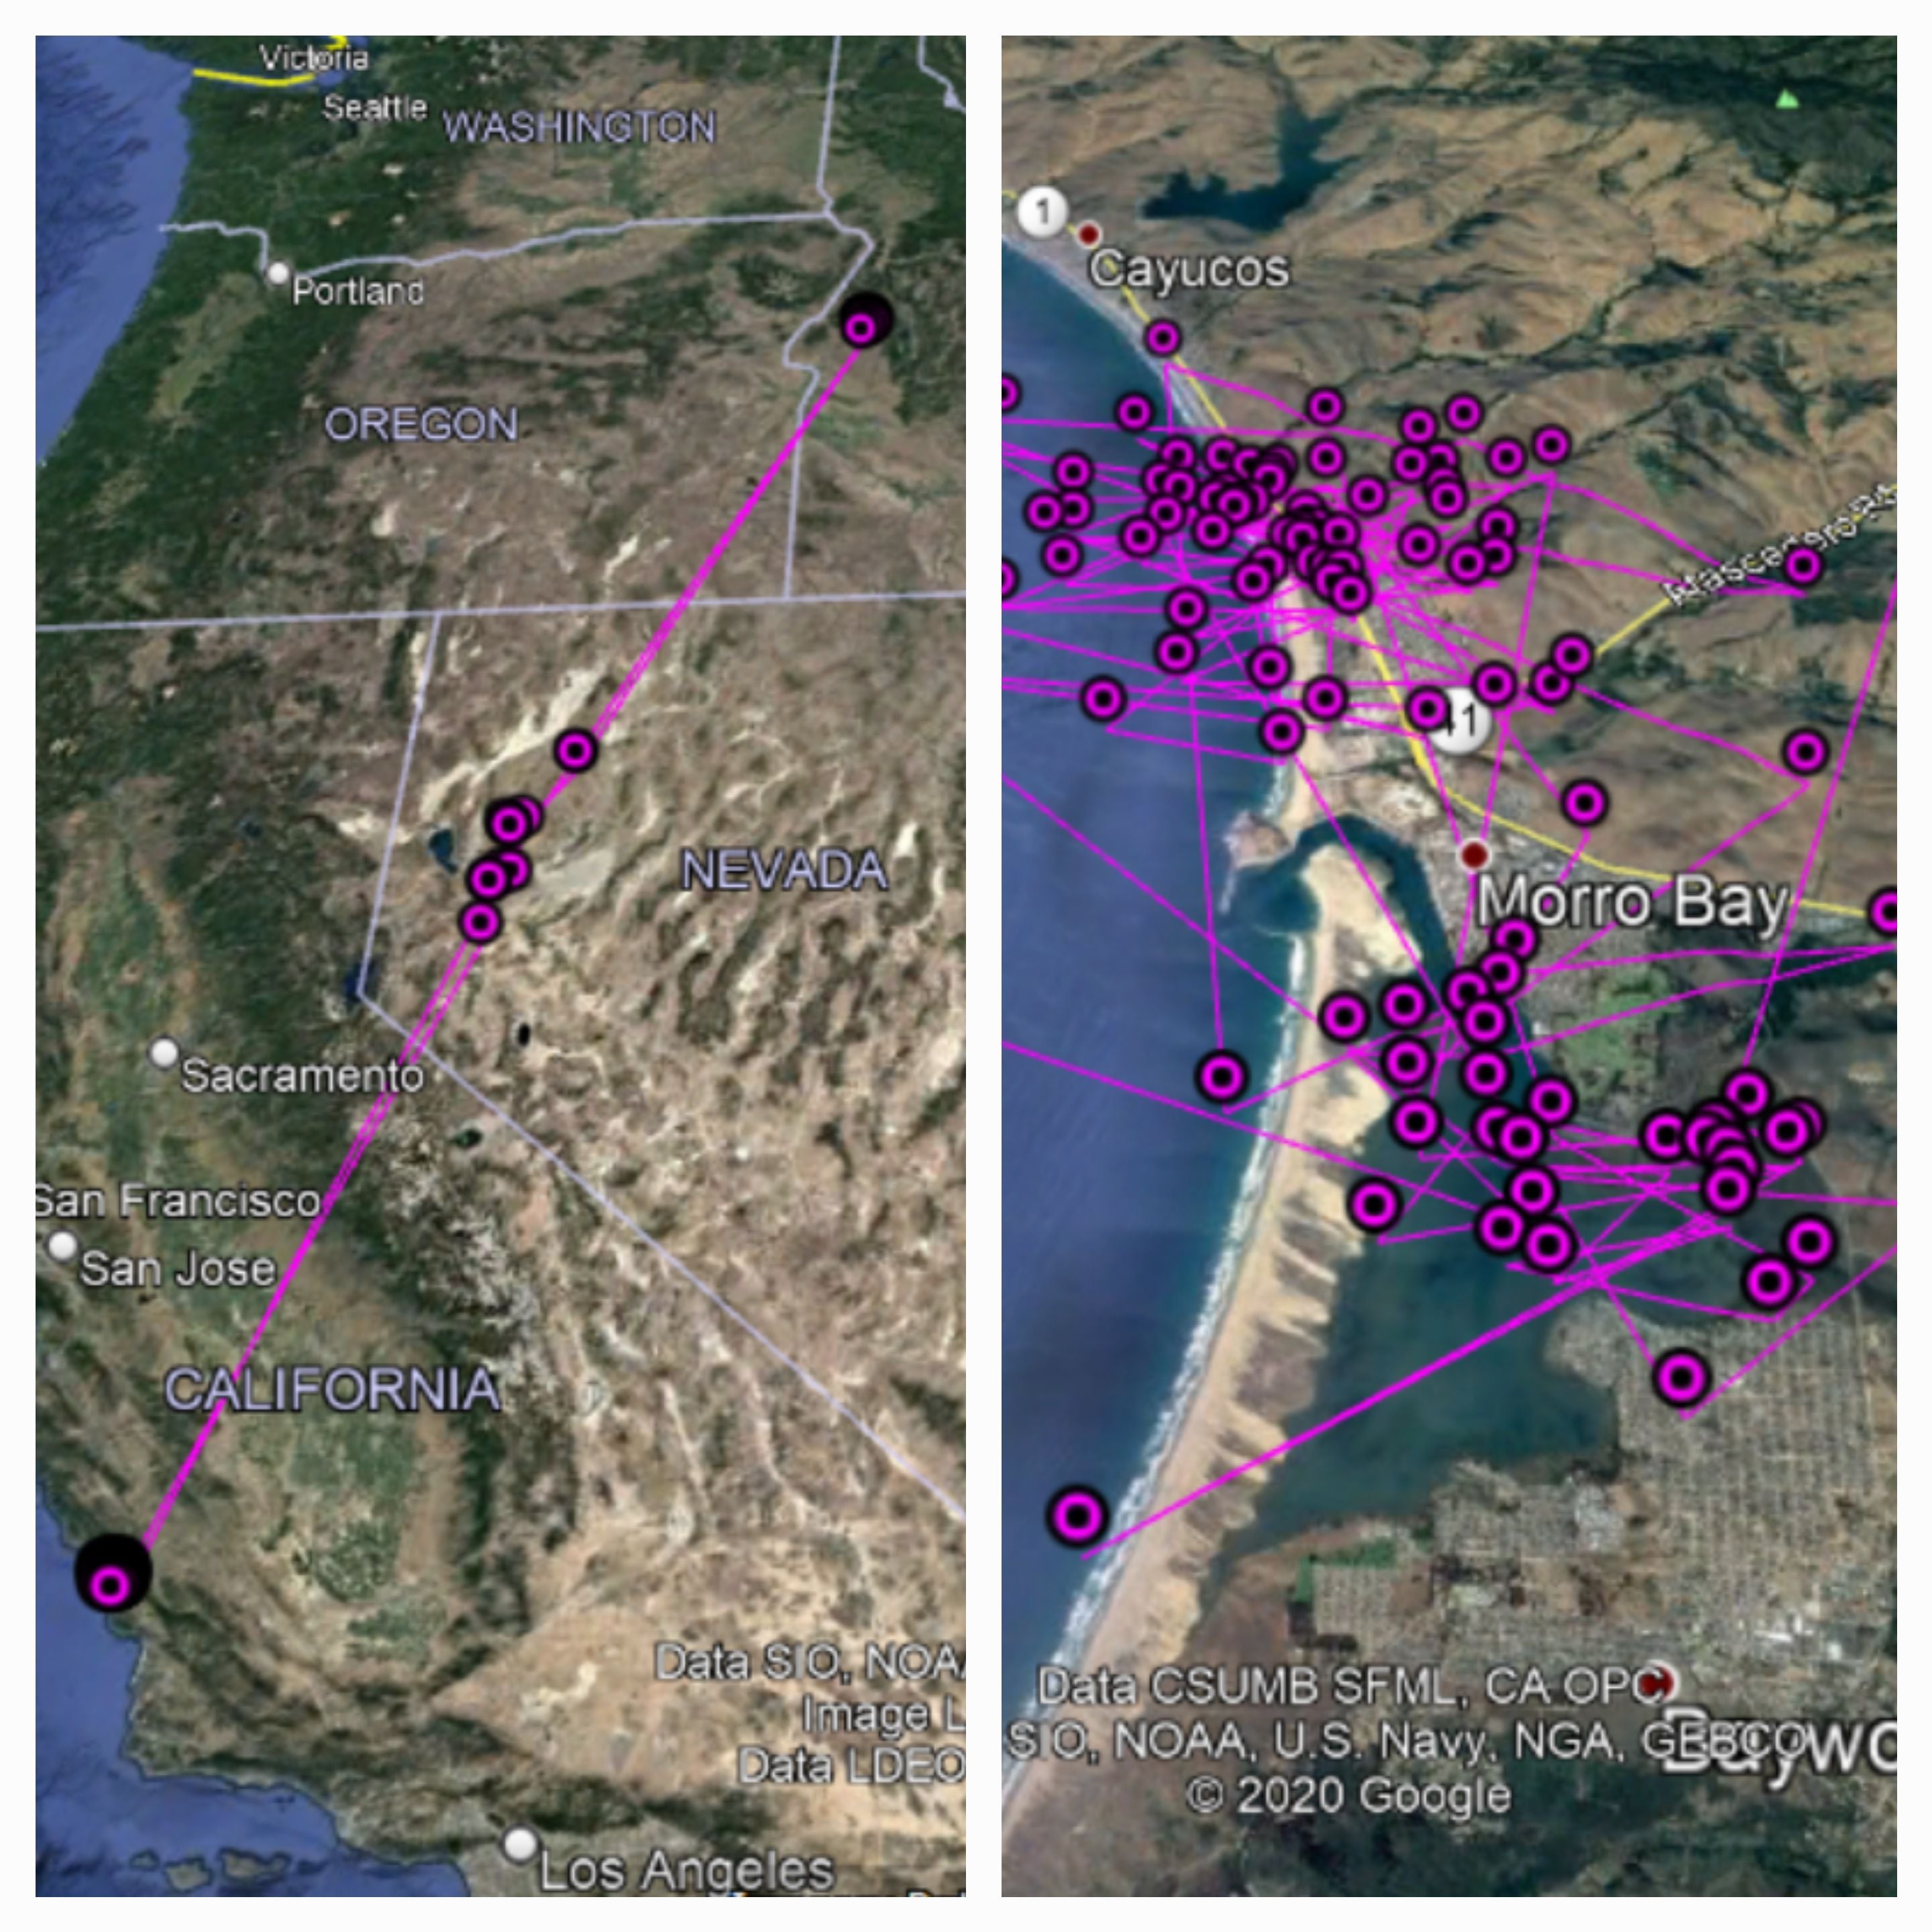 a map shows a zoomed out view of the western USA with a pink line connecting dots between coastal california, western nevada, and west-central idaho. A closeup map shows pink dots marking locations scattered all over Morro Bay California, reaching up to Cayucos to the north and Baywood to the south